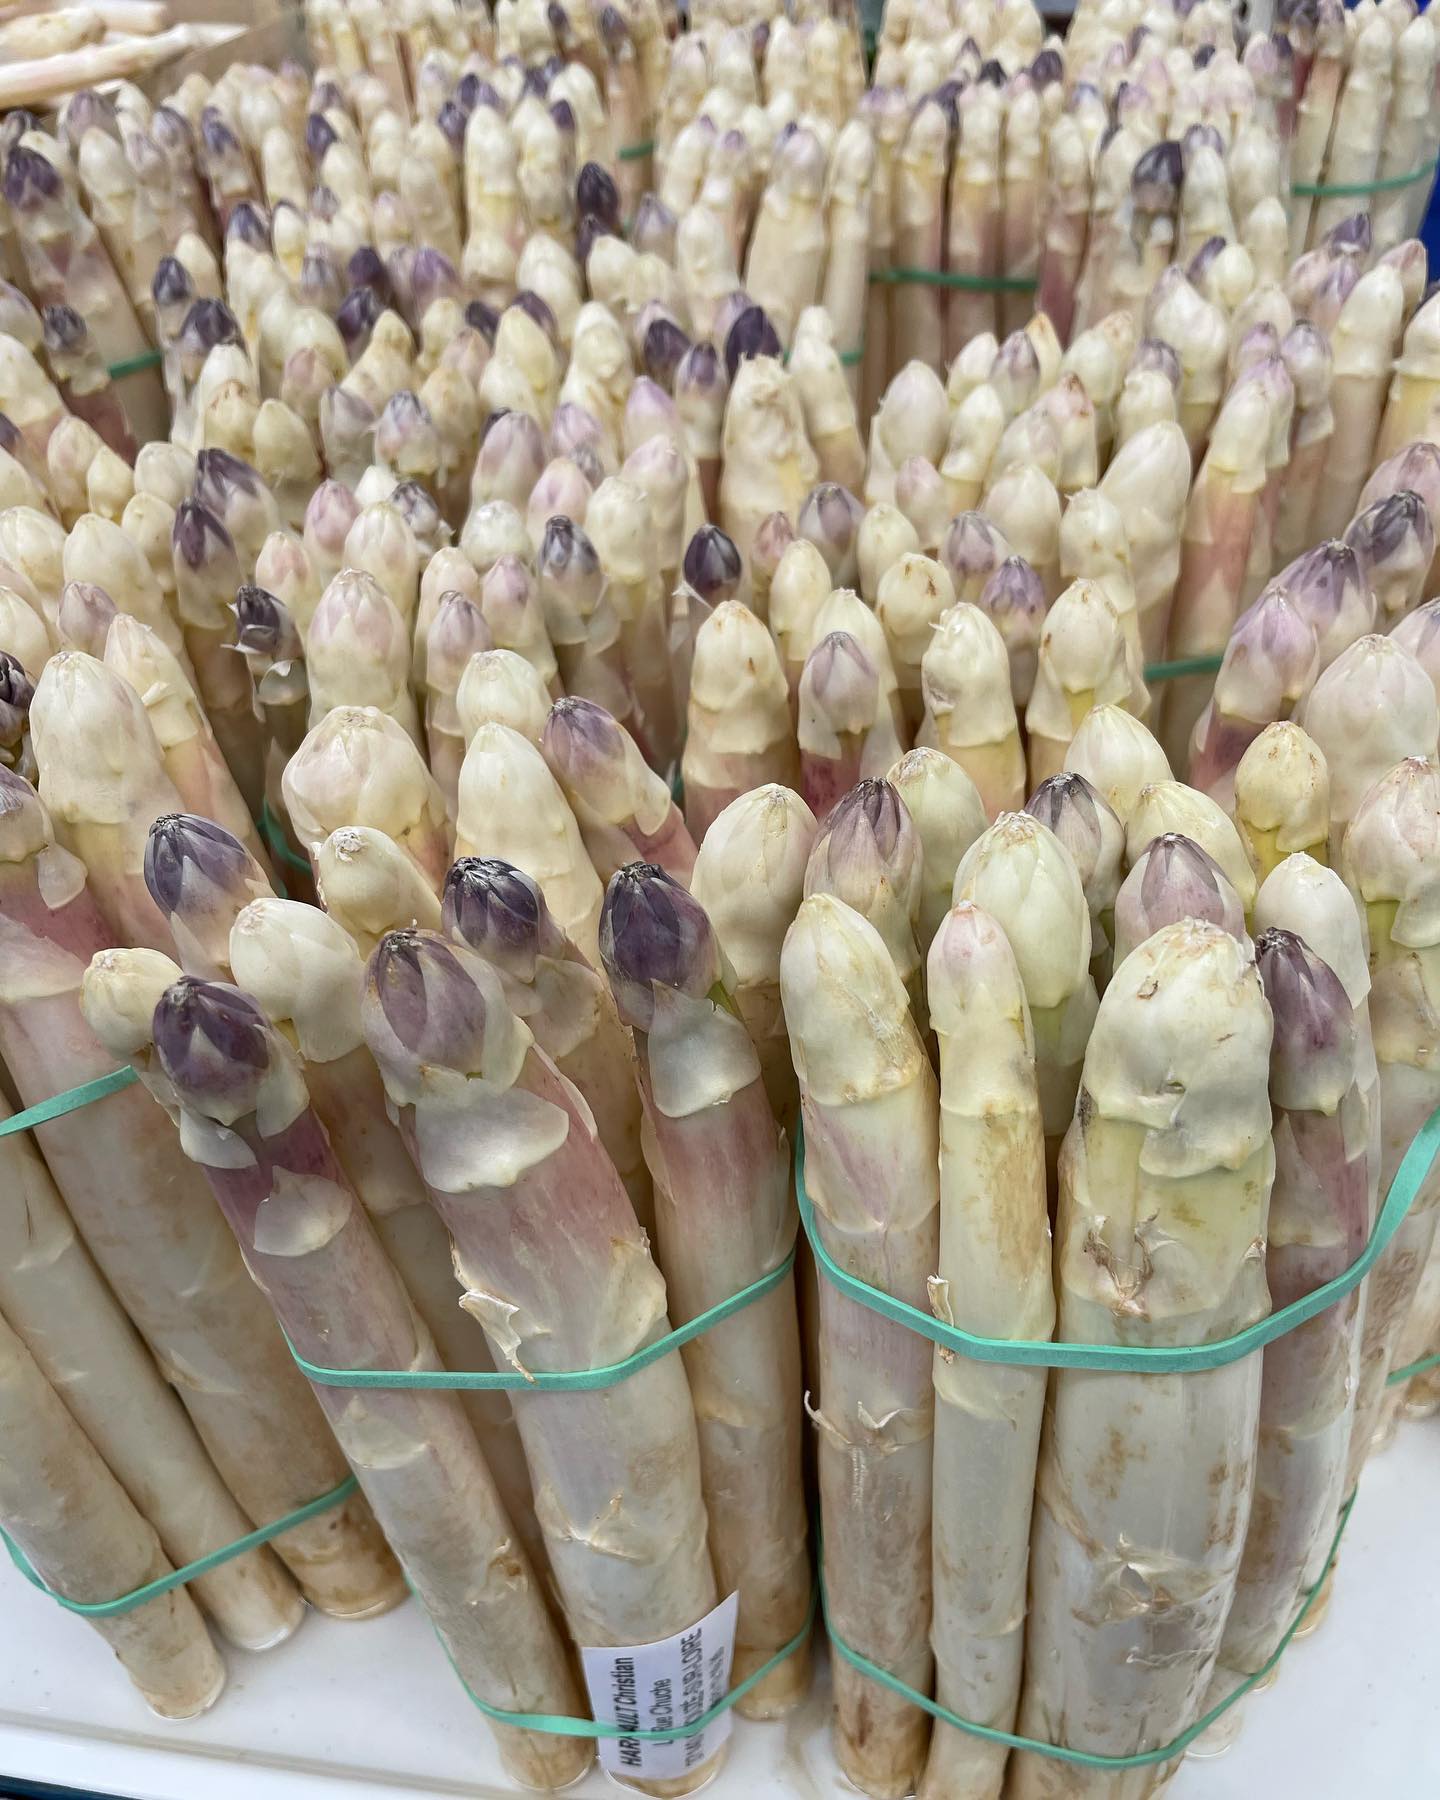 White asparagus is in season and made it’s way onto another menu this evening in the Loire valley…roasted and served with pork tenderloin medallions and a Dijon cream.
#retiredchef #loirevalley #whiteasparagus #chefmichaelsalmon